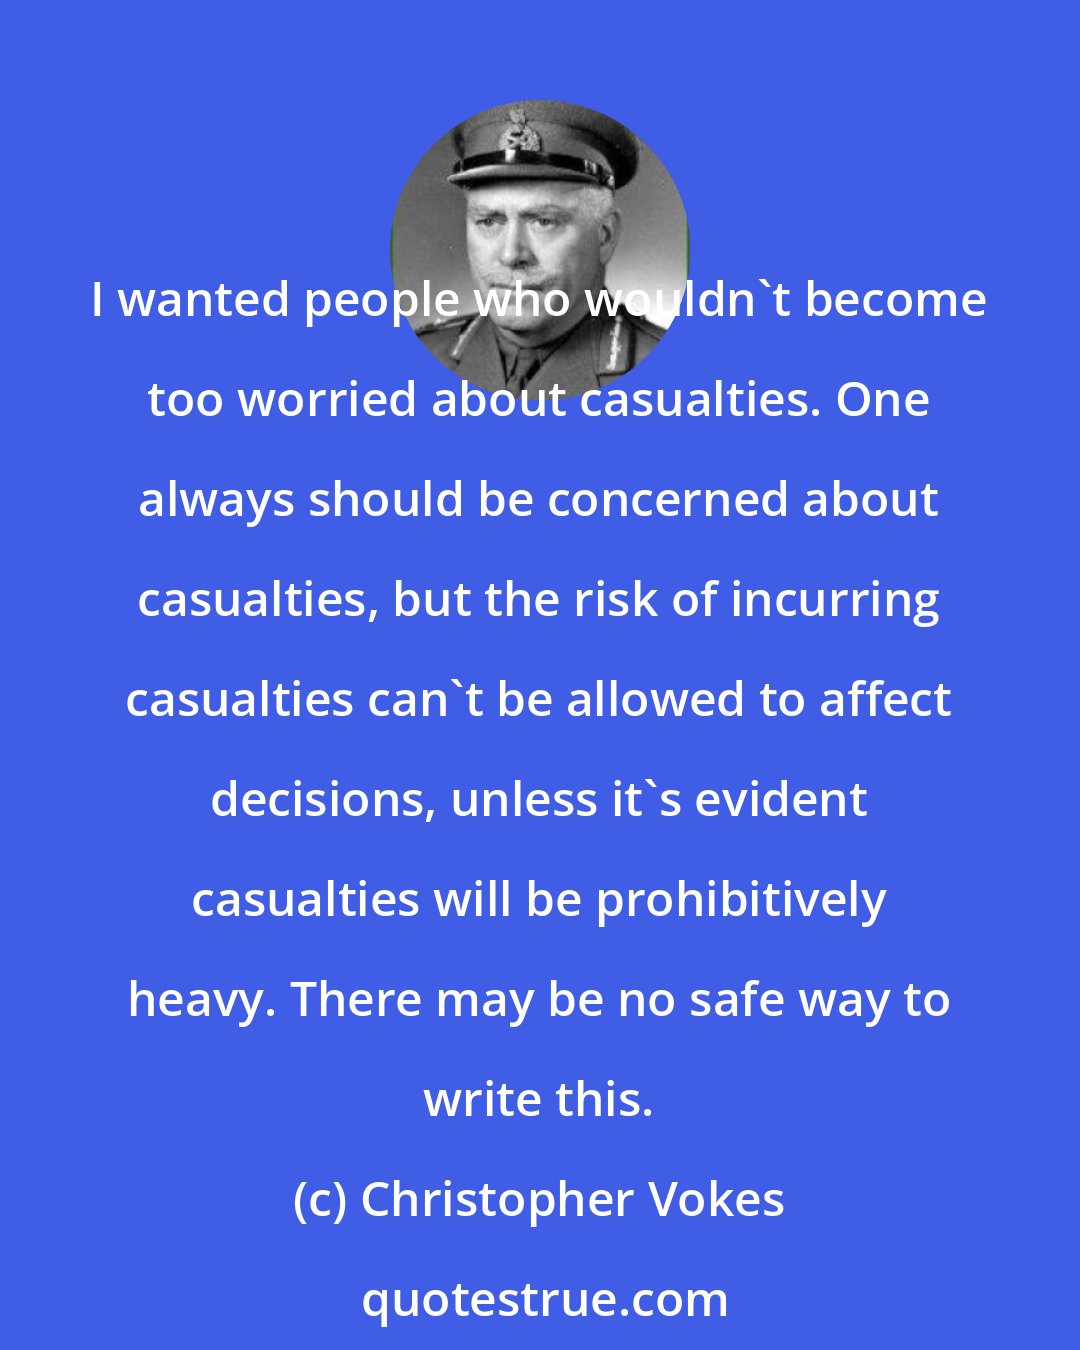 Christopher Vokes: I wanted people who wouldn't become too worried about casualties. One always should be concerned about casualties, but the risk of incurring casualties can't be allowed to affect decisions, unless it's evident casualties will be prohibitively heavy. There may be no safe way to write this.